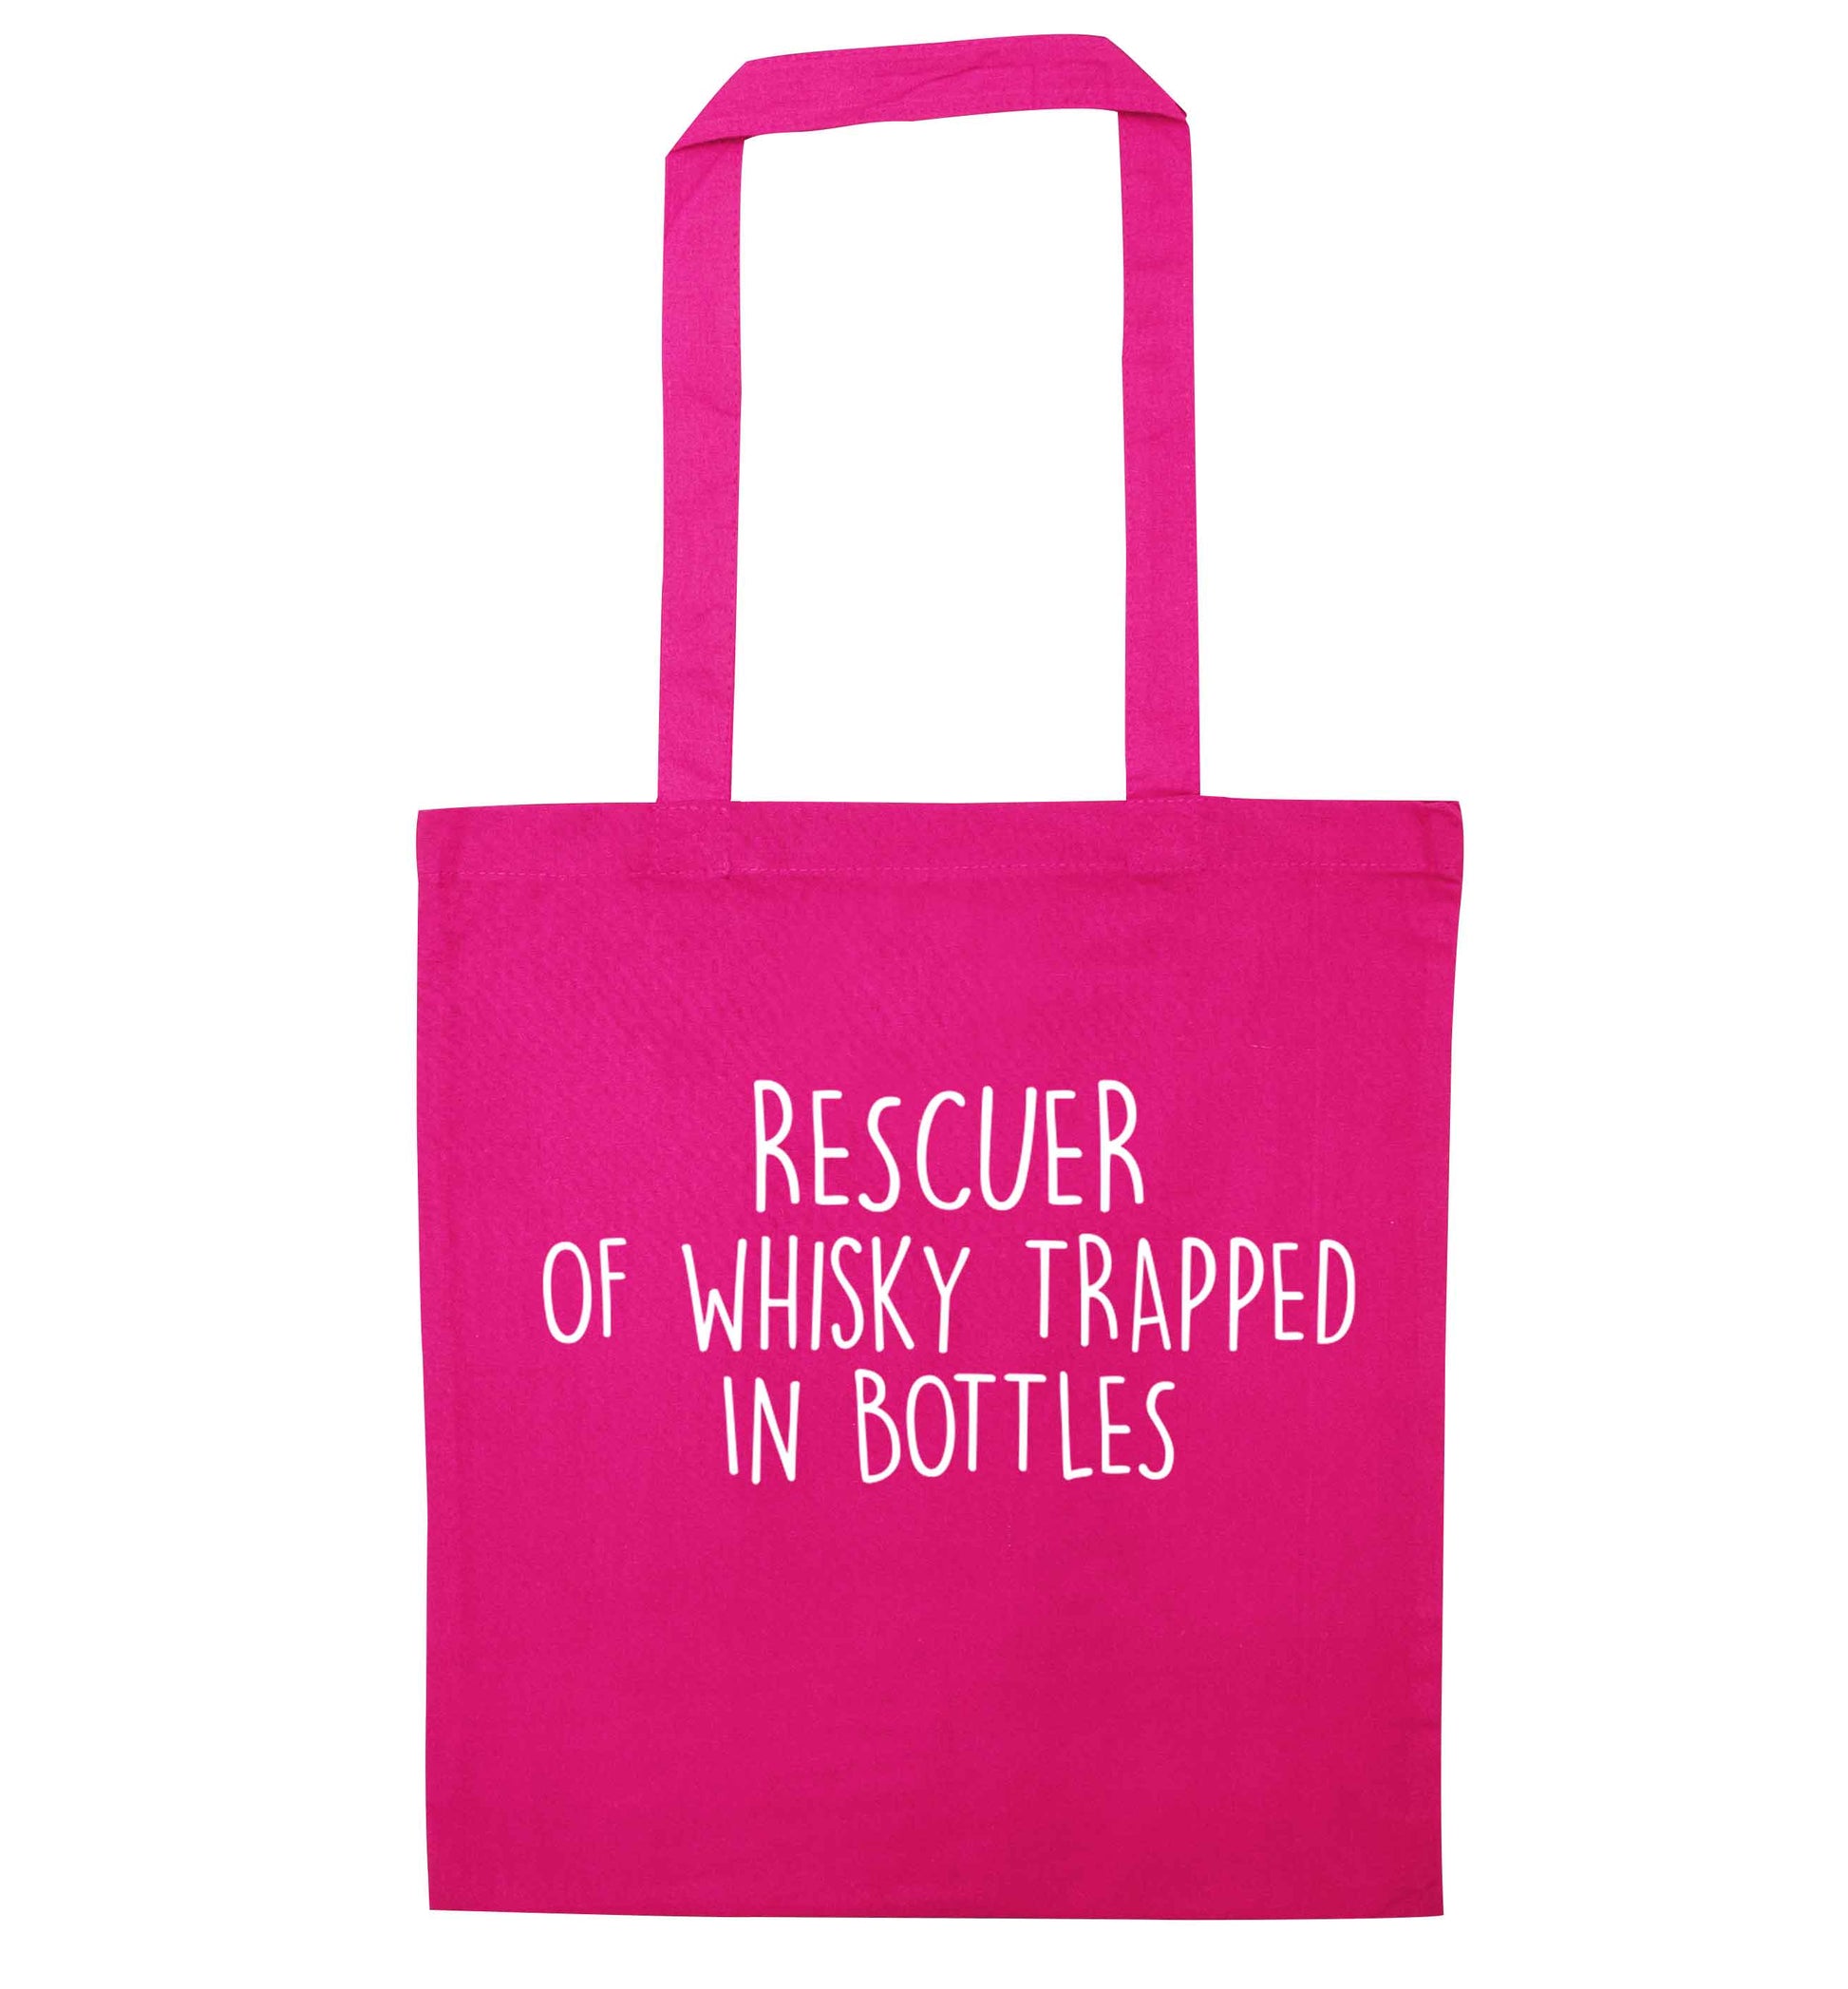 Rescuer of whisky trapped in bottles pink tote bag